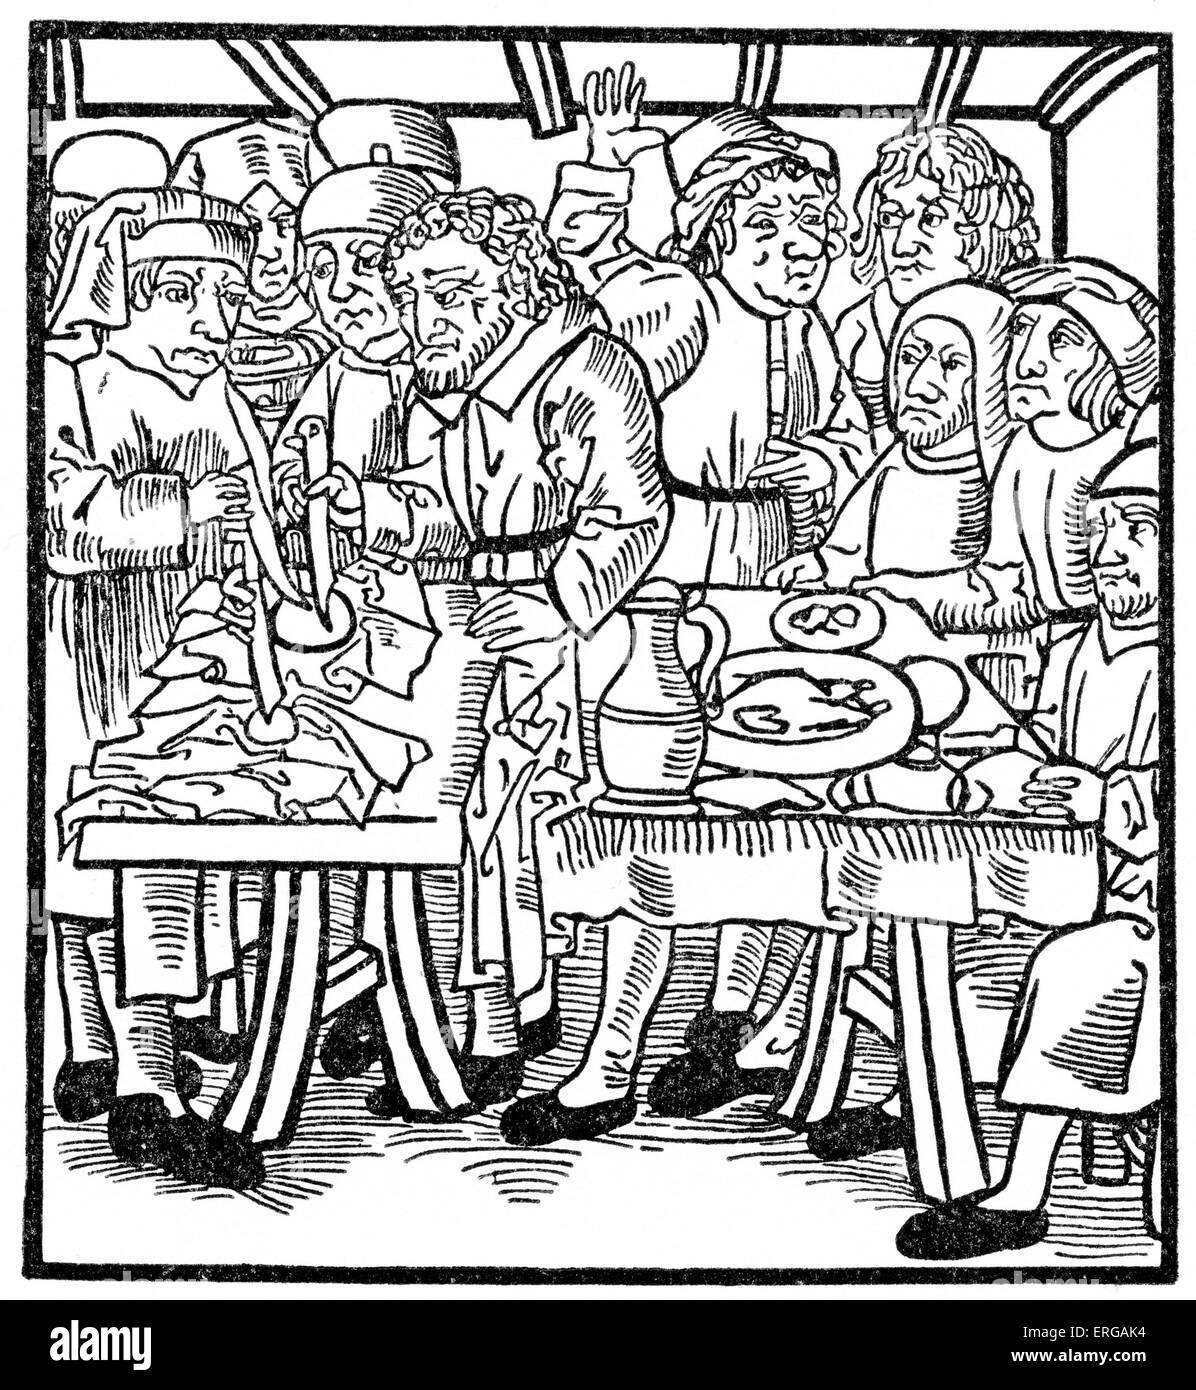 Jews of Sternberg represented as transfixing hosts. Anti-semitic woodcut from Lubeck 1492.( Defiling the host or sacred wafer of the mass. In the Middle Ages the Jews were frequently accused of desecrating the host, an accusation equal in gravity to that of desecrating relics and images of Jesus and the saints. This accusation has brought thousands of Jews to the stake. The Jews were alleged to steal the host or to acquire it by purchase or bribery, to break it or seethe it, and to stick needles into it or transfix it, whereupon it began to bleed.) Anti- Jewish libels Stock Photo